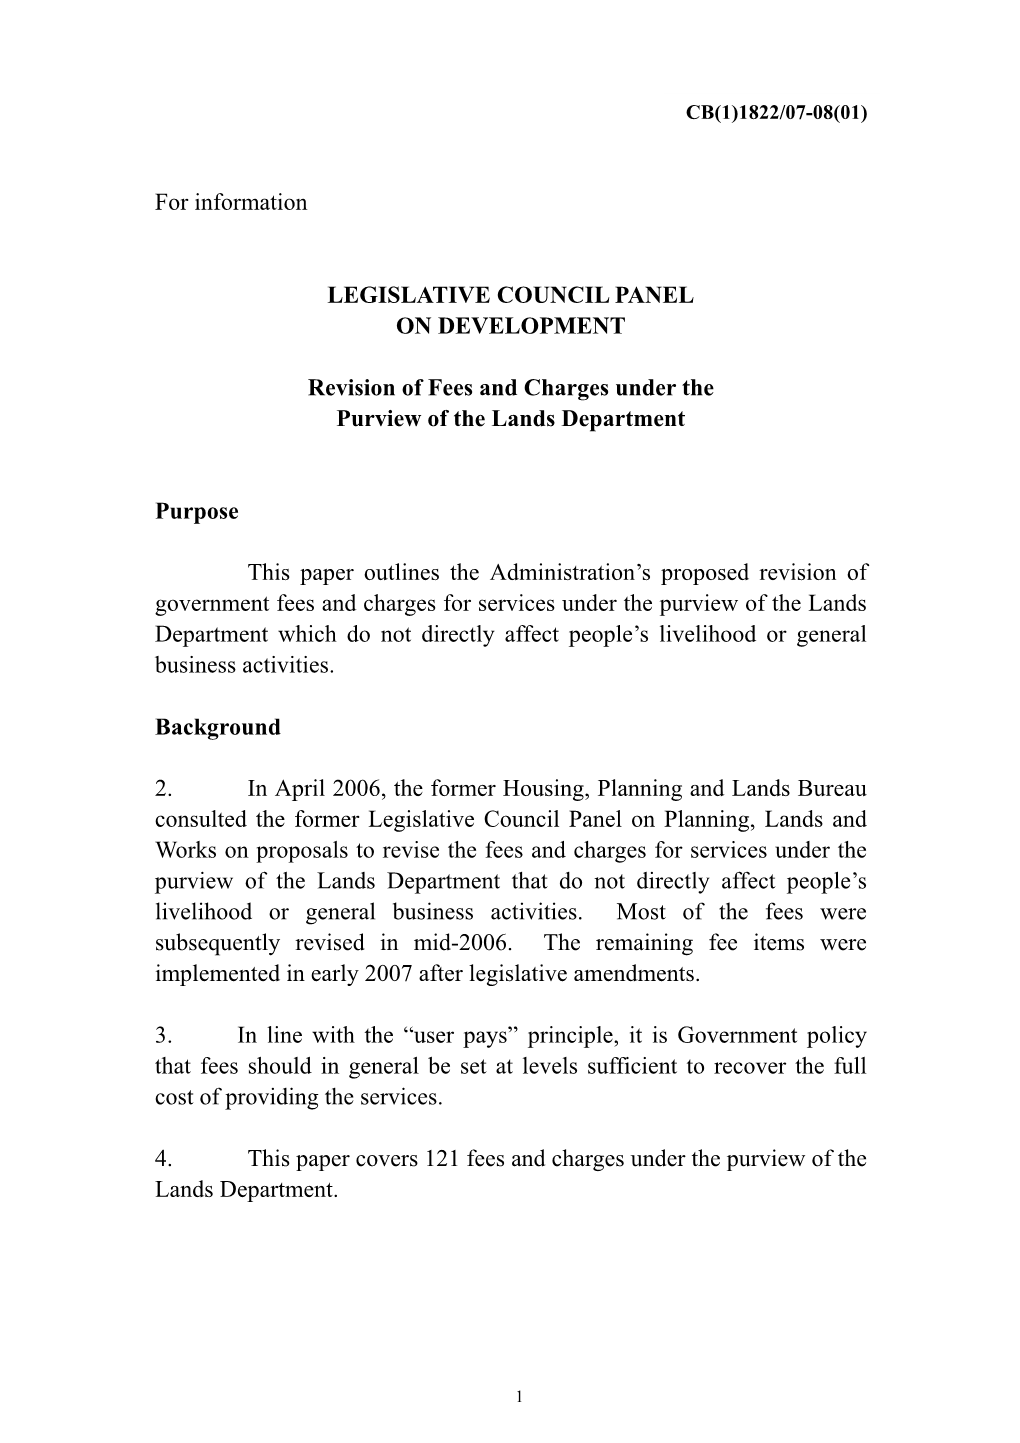 Administration's Paper on Revision of Fees and Charges Under the Purview